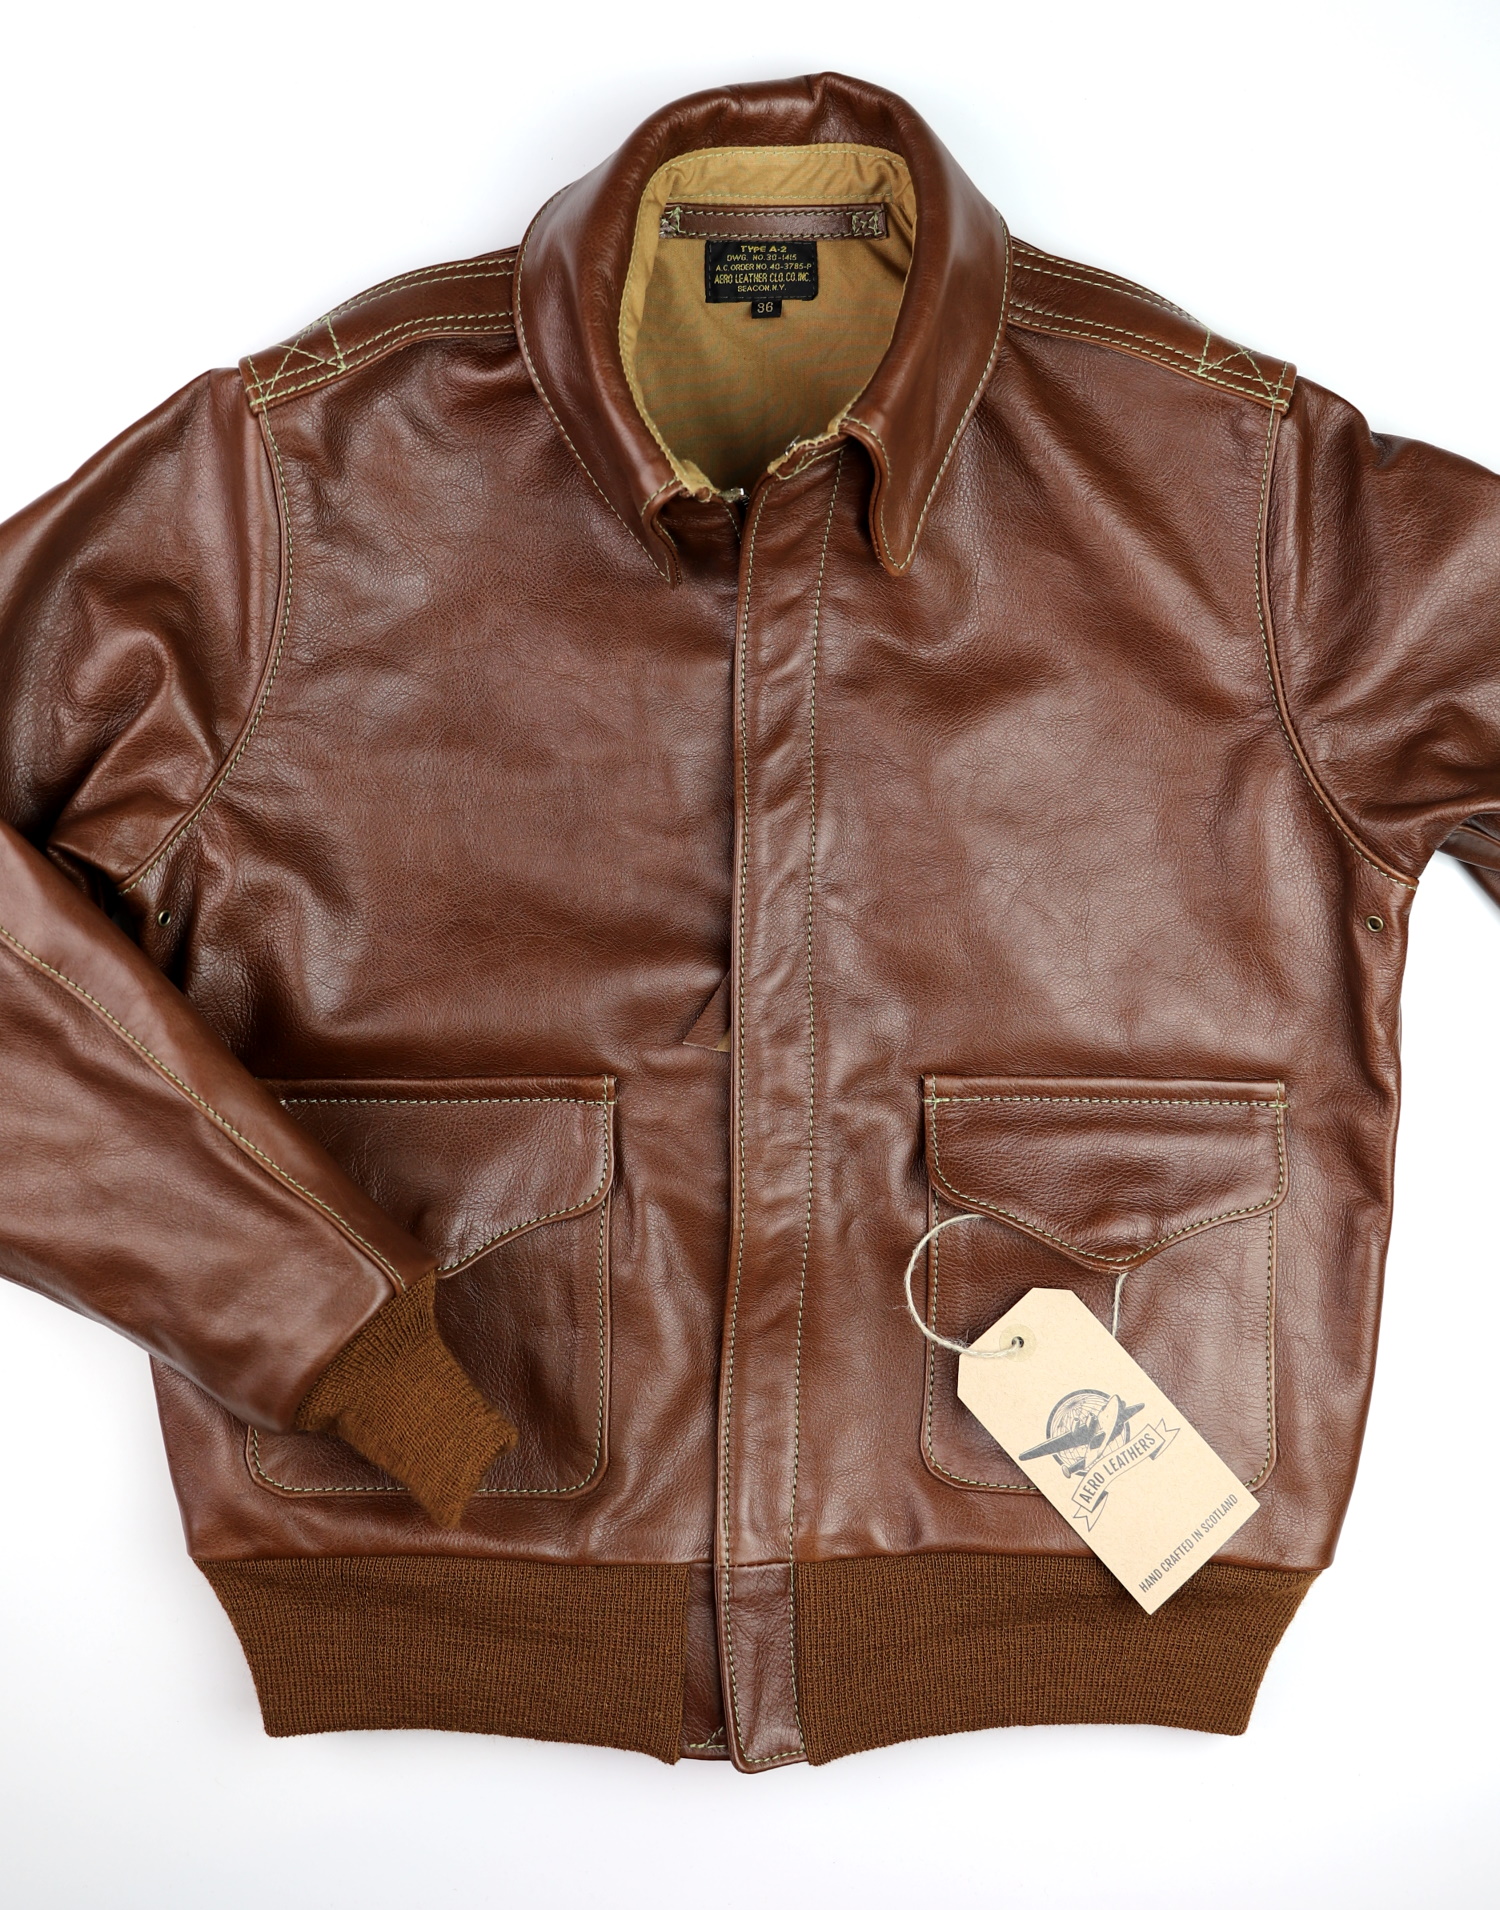 Aero A-2 40-3785-P Russet Vicenza Horsehide XBA3 front.jpg